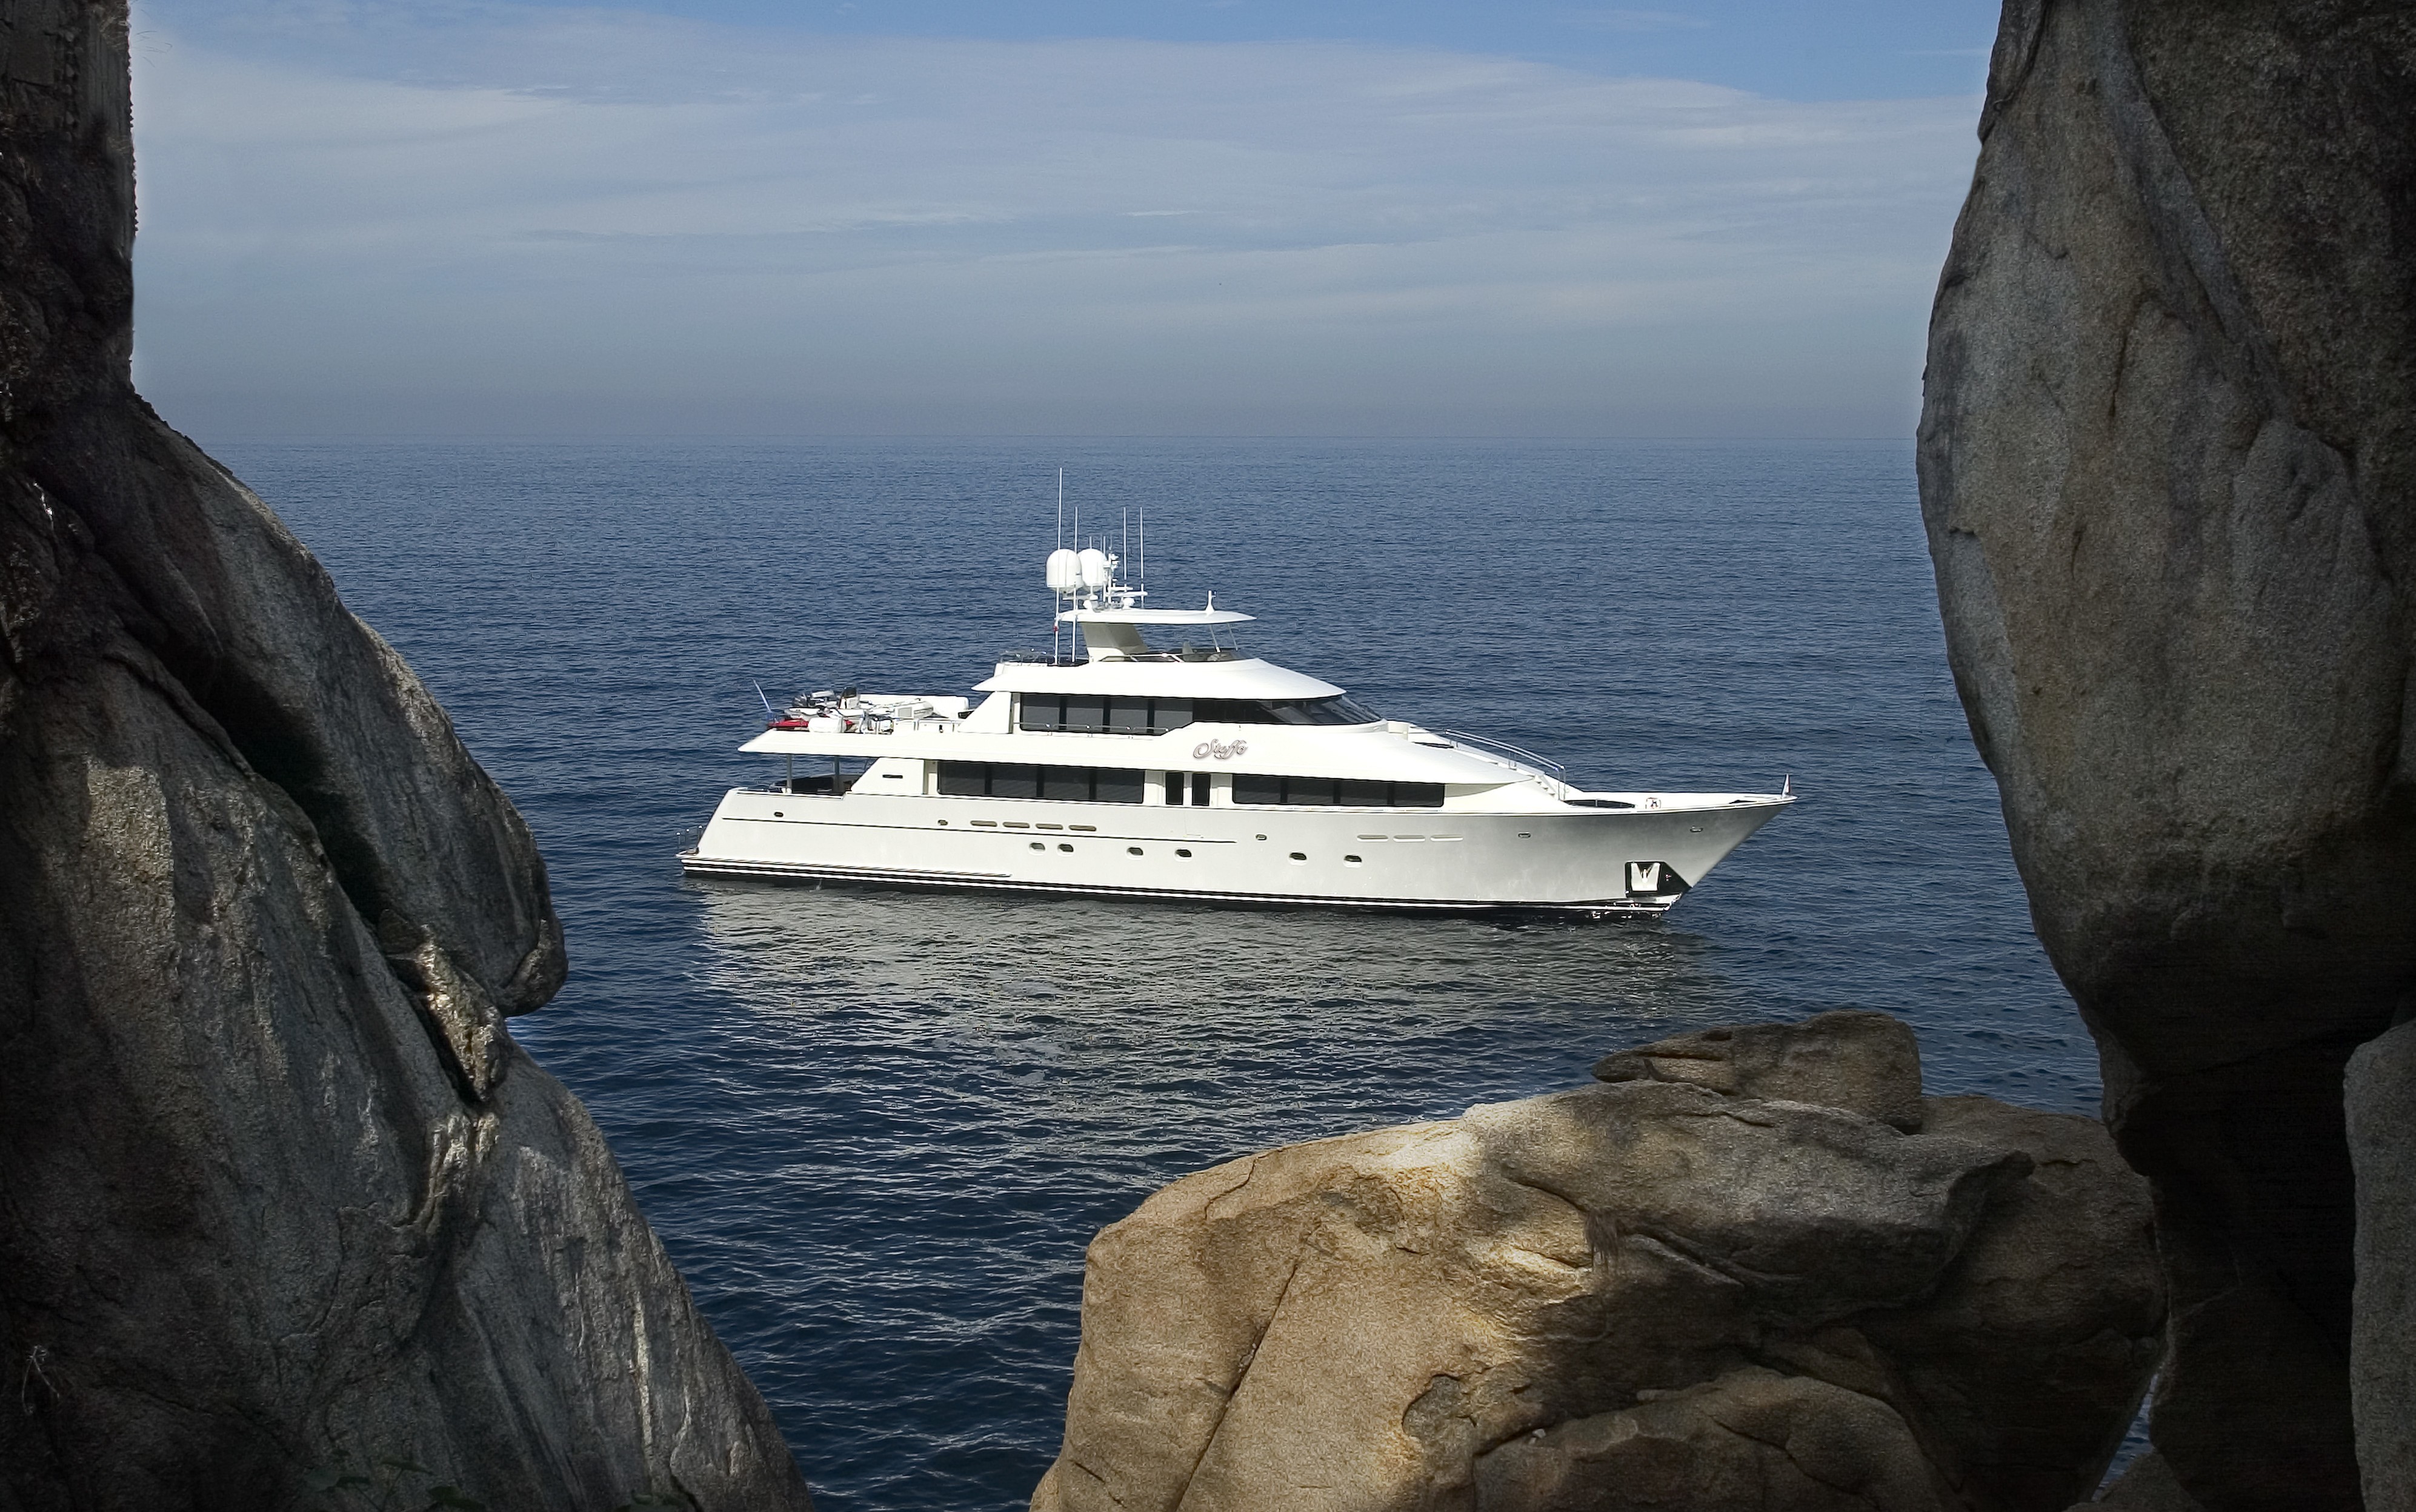 The 39m Yacht STEFFO